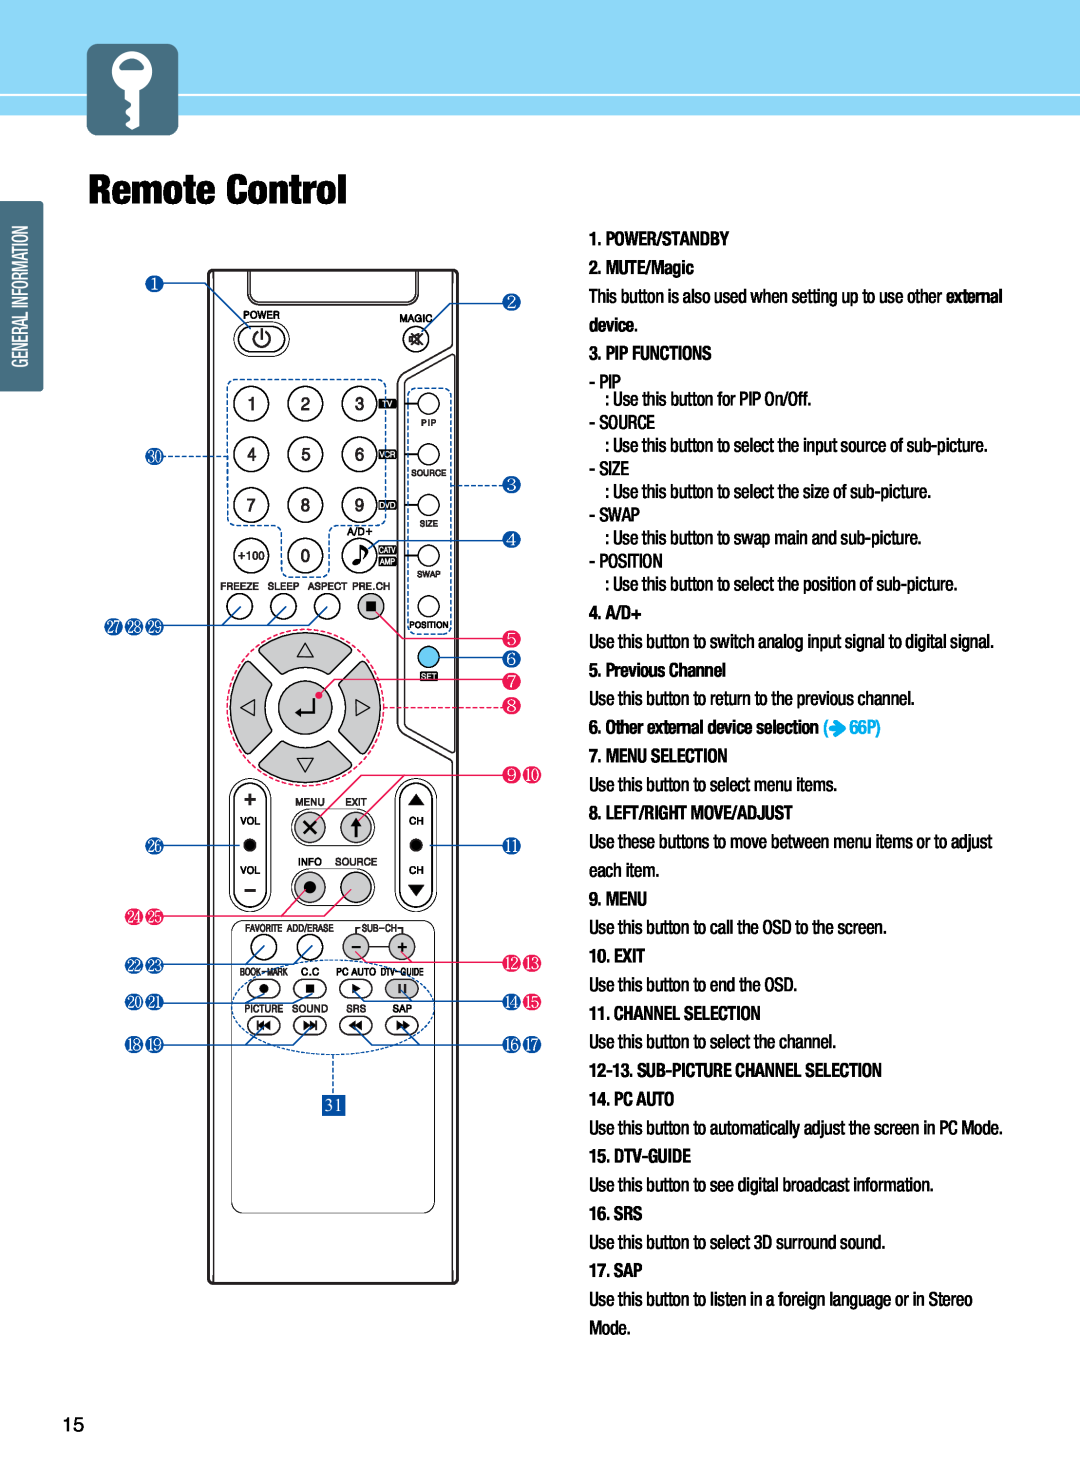 Hyundai Q421S Remote Control, POWER/STANDBY 2. MUTE/Magic, device 3. PIP FUNCTIONS, 4. A/D+, Previous Channel, Menu, Exit 